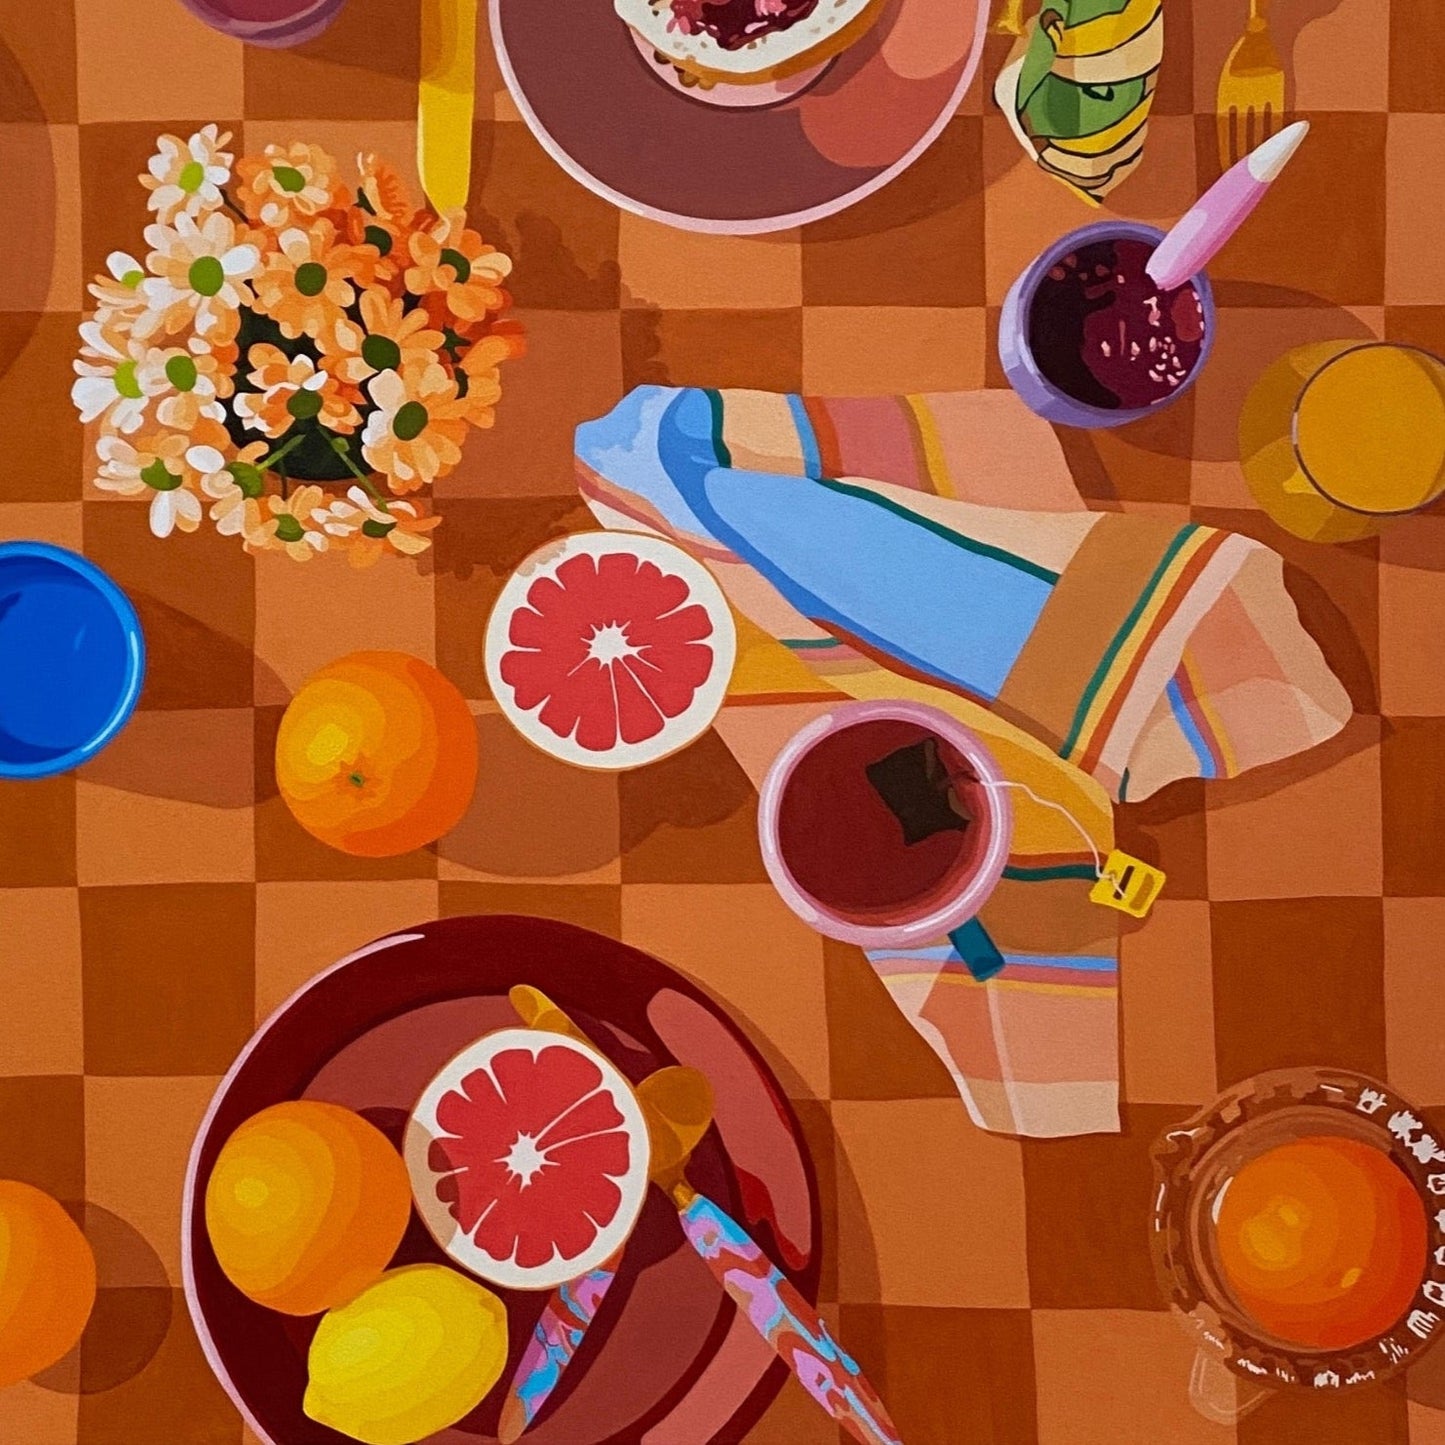 closeup photo of a fine art print of a breakfast setup with oranges, lemons, tea towels, cutlery by kip and co, and flowers and cups on a chequered tablecloth background